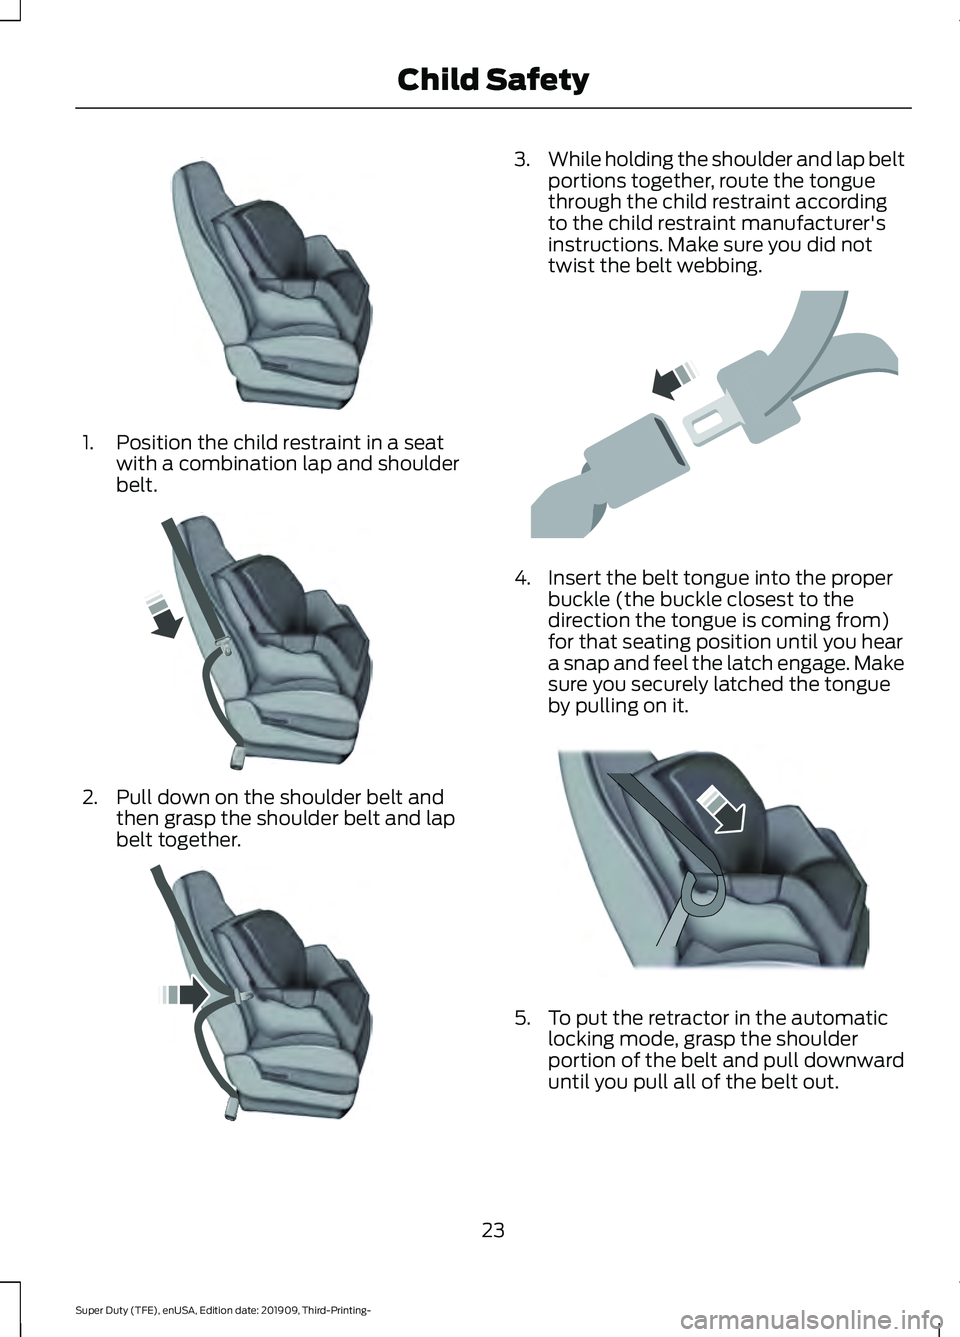 FORD F-550 2020  Owners Manual 1. Position the child restraint in a seat
with a combination lap and shoulder
belt. 2. Pull down on the shoulder belt and
then grasp the shoulder belt and lap
belt together. 3.
While holding the shoul